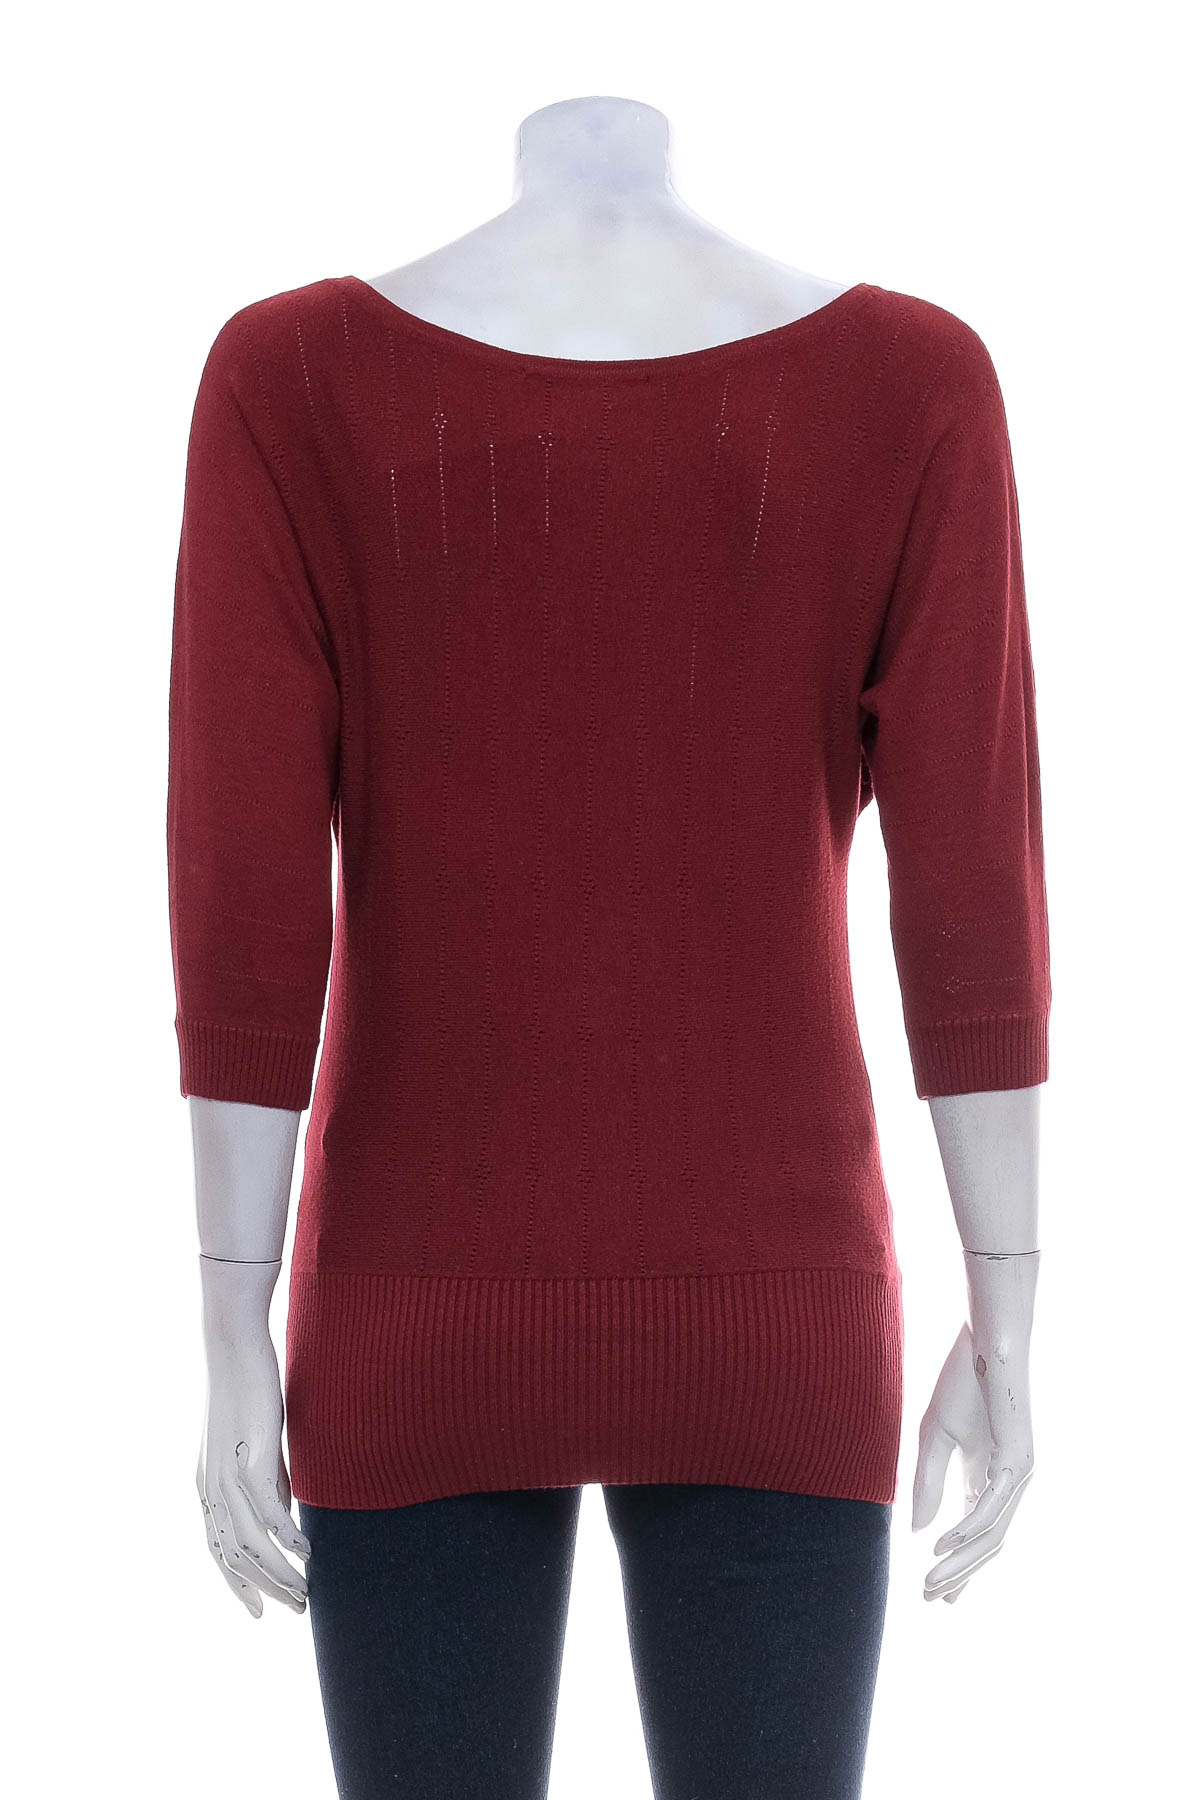 Women's sweater - Collectif - 1